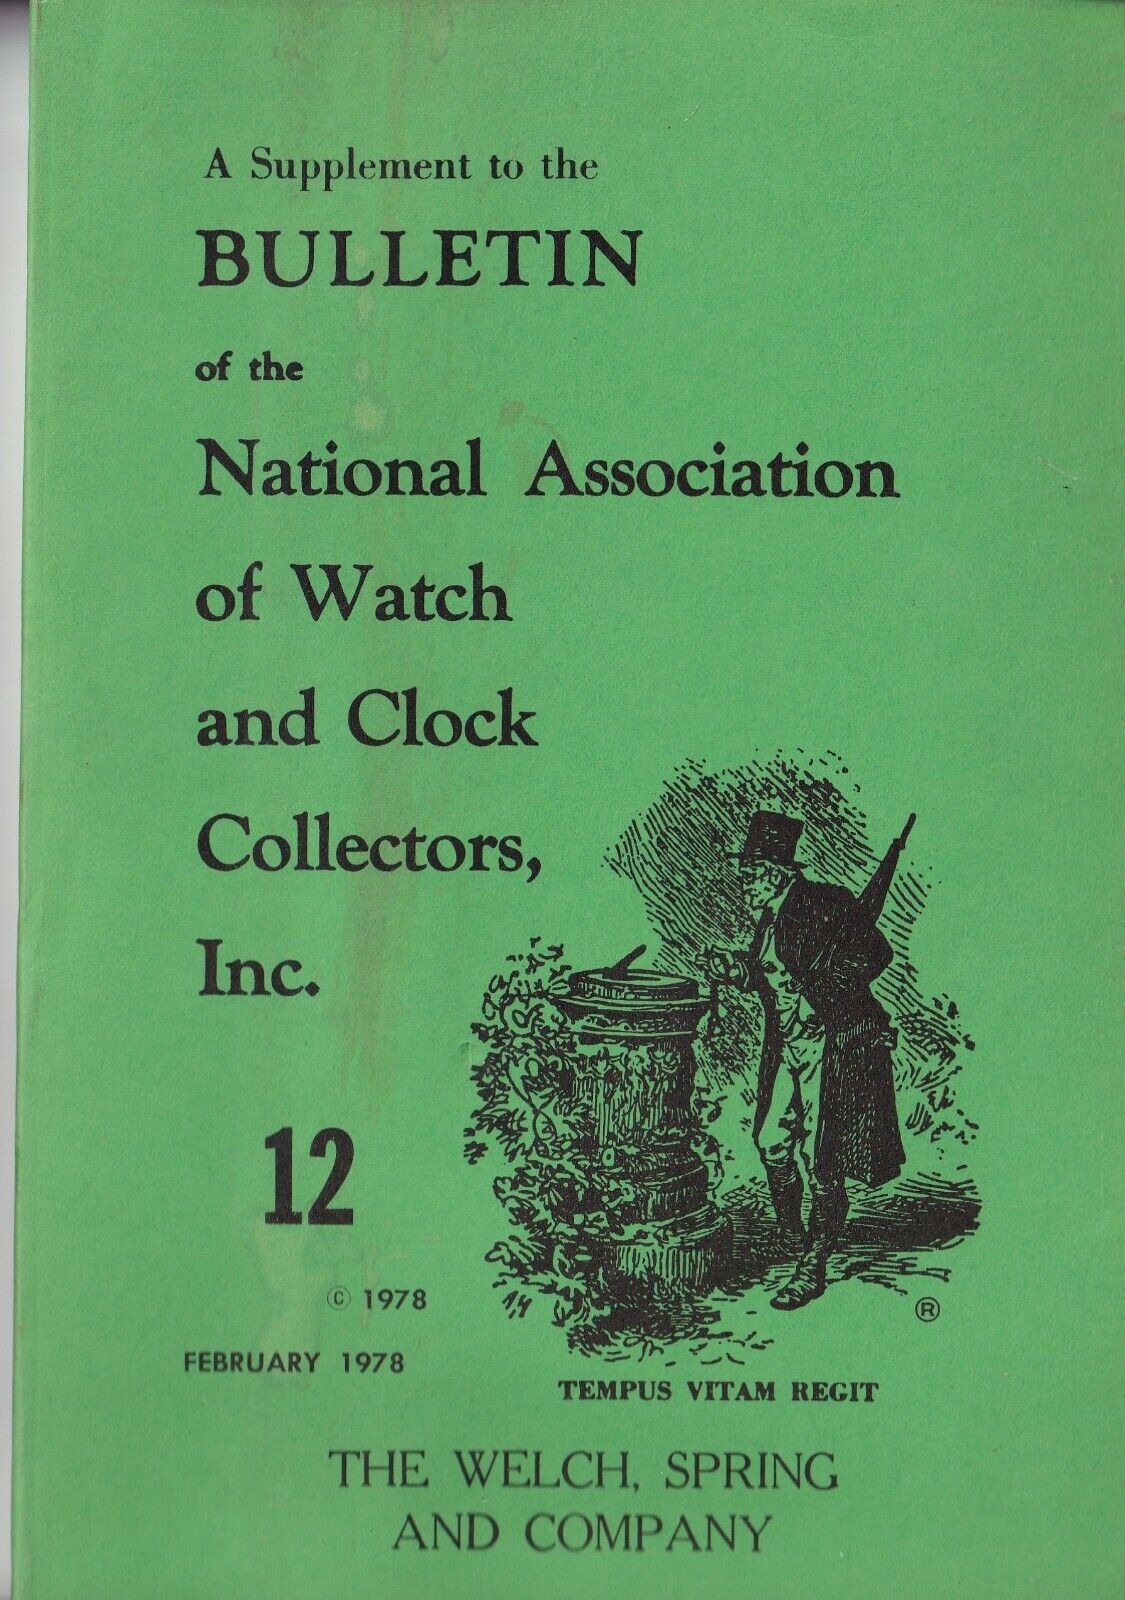 february 1978 bulletin of the national association of watch and clock collectors